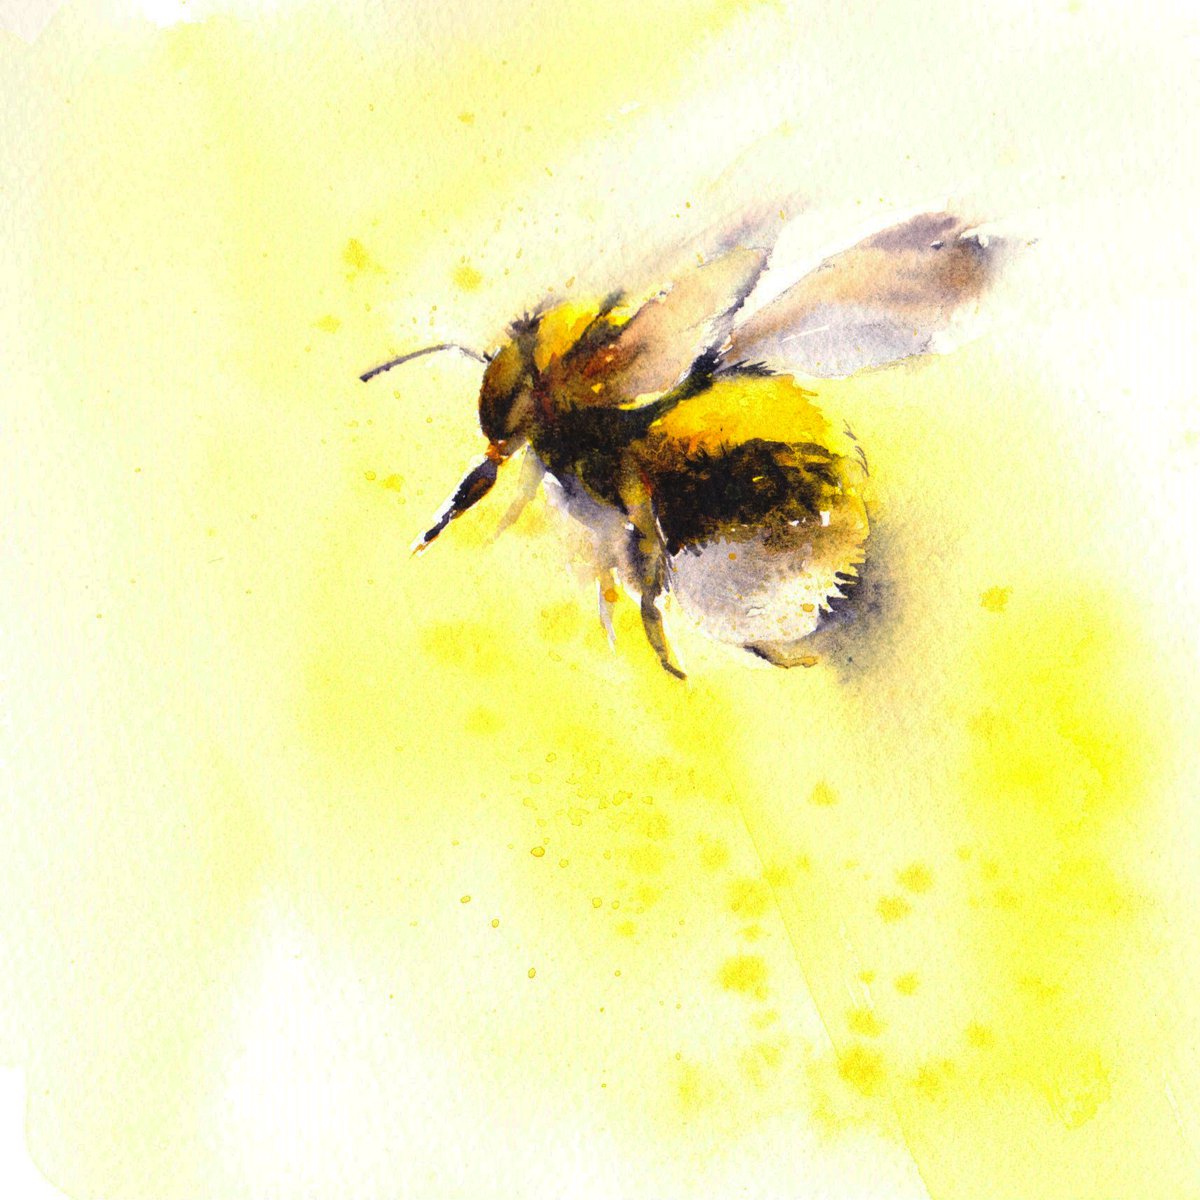 Bumble bee in golden mist II by Anjana Cawdell